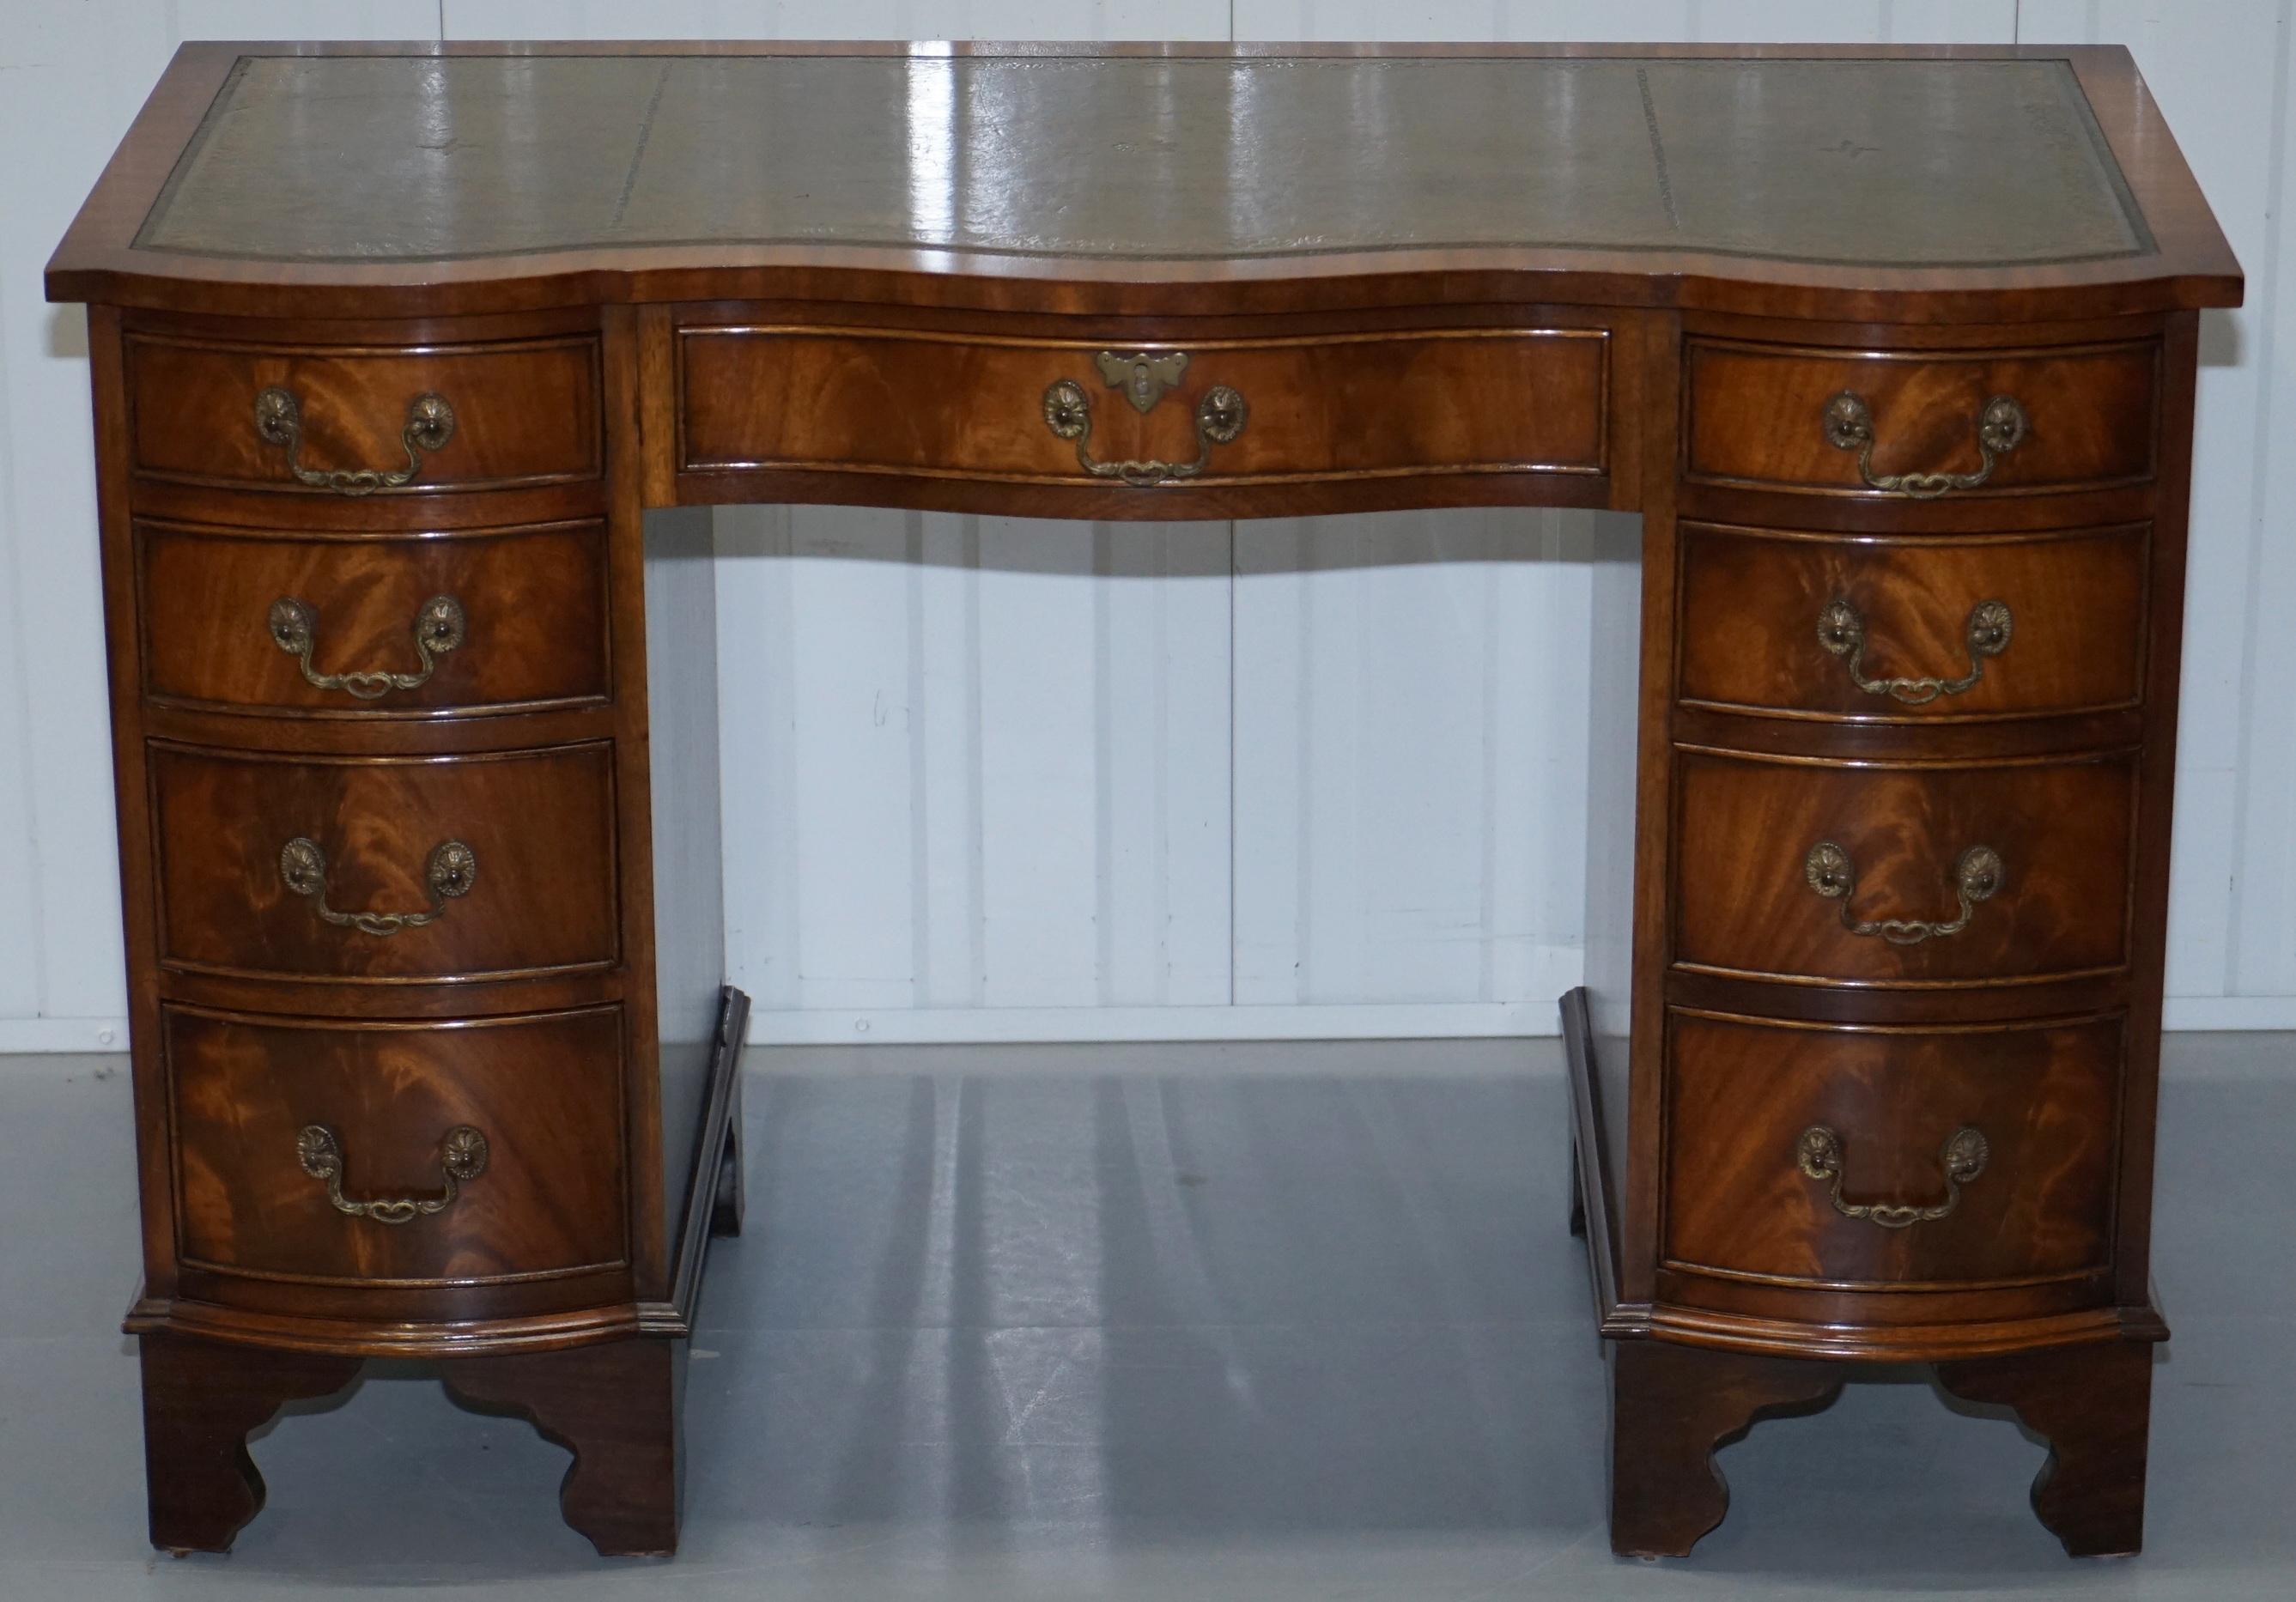 We are delighted to offer for sale this stunning Serpentine fronted leather top flamed mahogany twin pedestal partner desk

A very good looking well made and decorative piece, this desk is a lovely size, it offers plenty of workspace and the